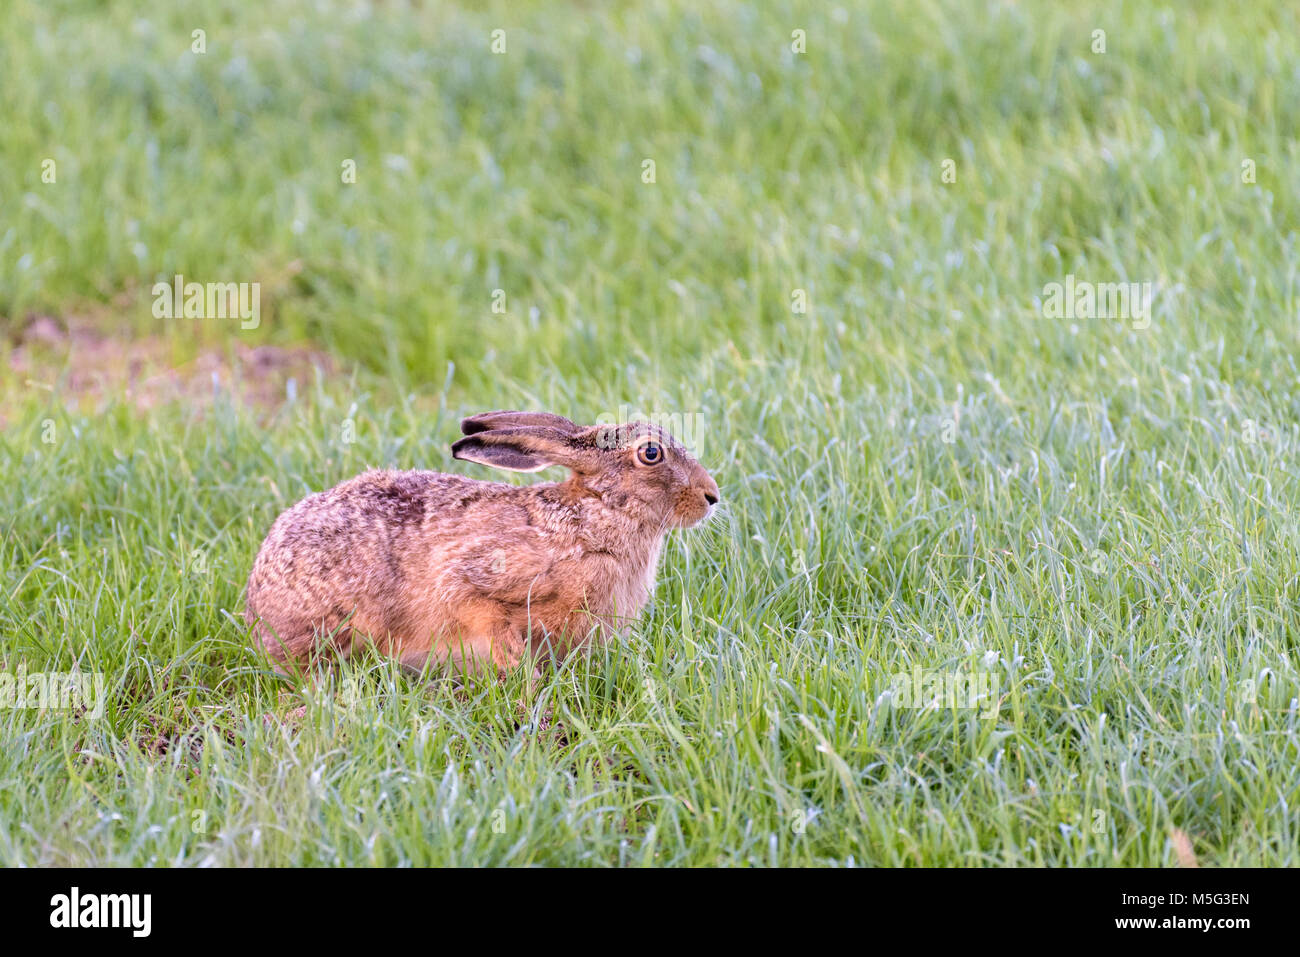 A european hare is sitting in a green meadow and looking attentively. Stock Photo